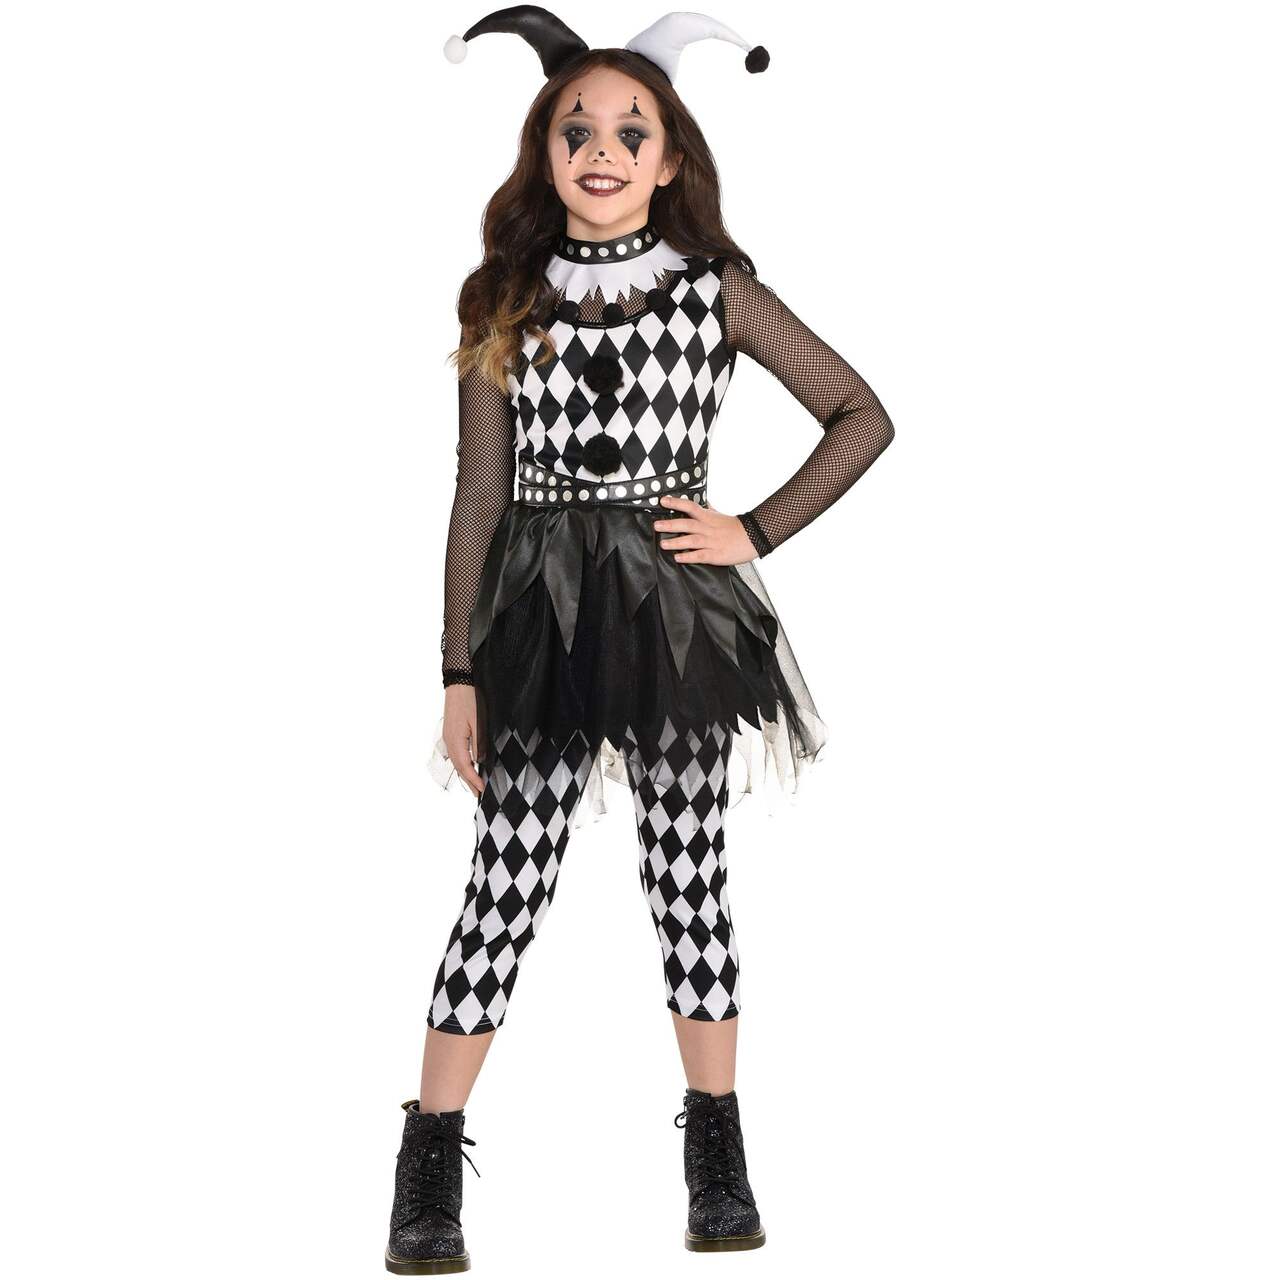 Kids' Punky Jester Black/White Outfit with Shirt/Skirt/Leggings/Headband  Halloween Costume, Assorted Sizes